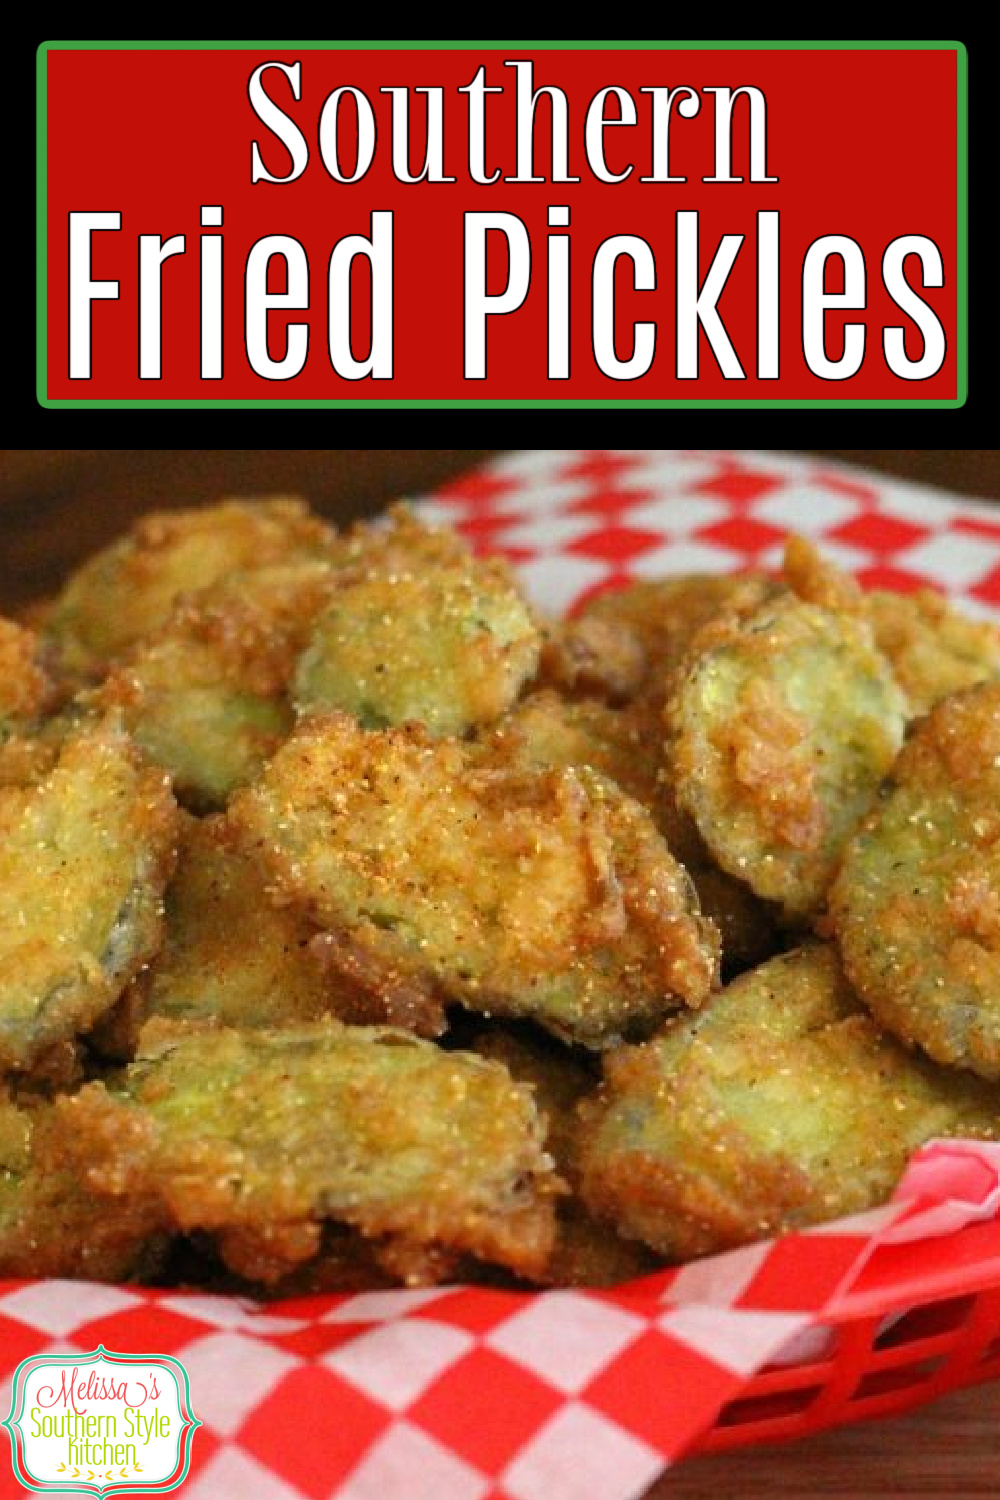 Make your own crispy golden Fried Pickles with a Creole sauce for dipping at home #dillpickles #friedpickles #frieddillpickles #dillpicklerecipes #appetizers #gamedayrecipes #southernfood #southernrecipes #pickles #snacking #gamedayfood via @melissasssk